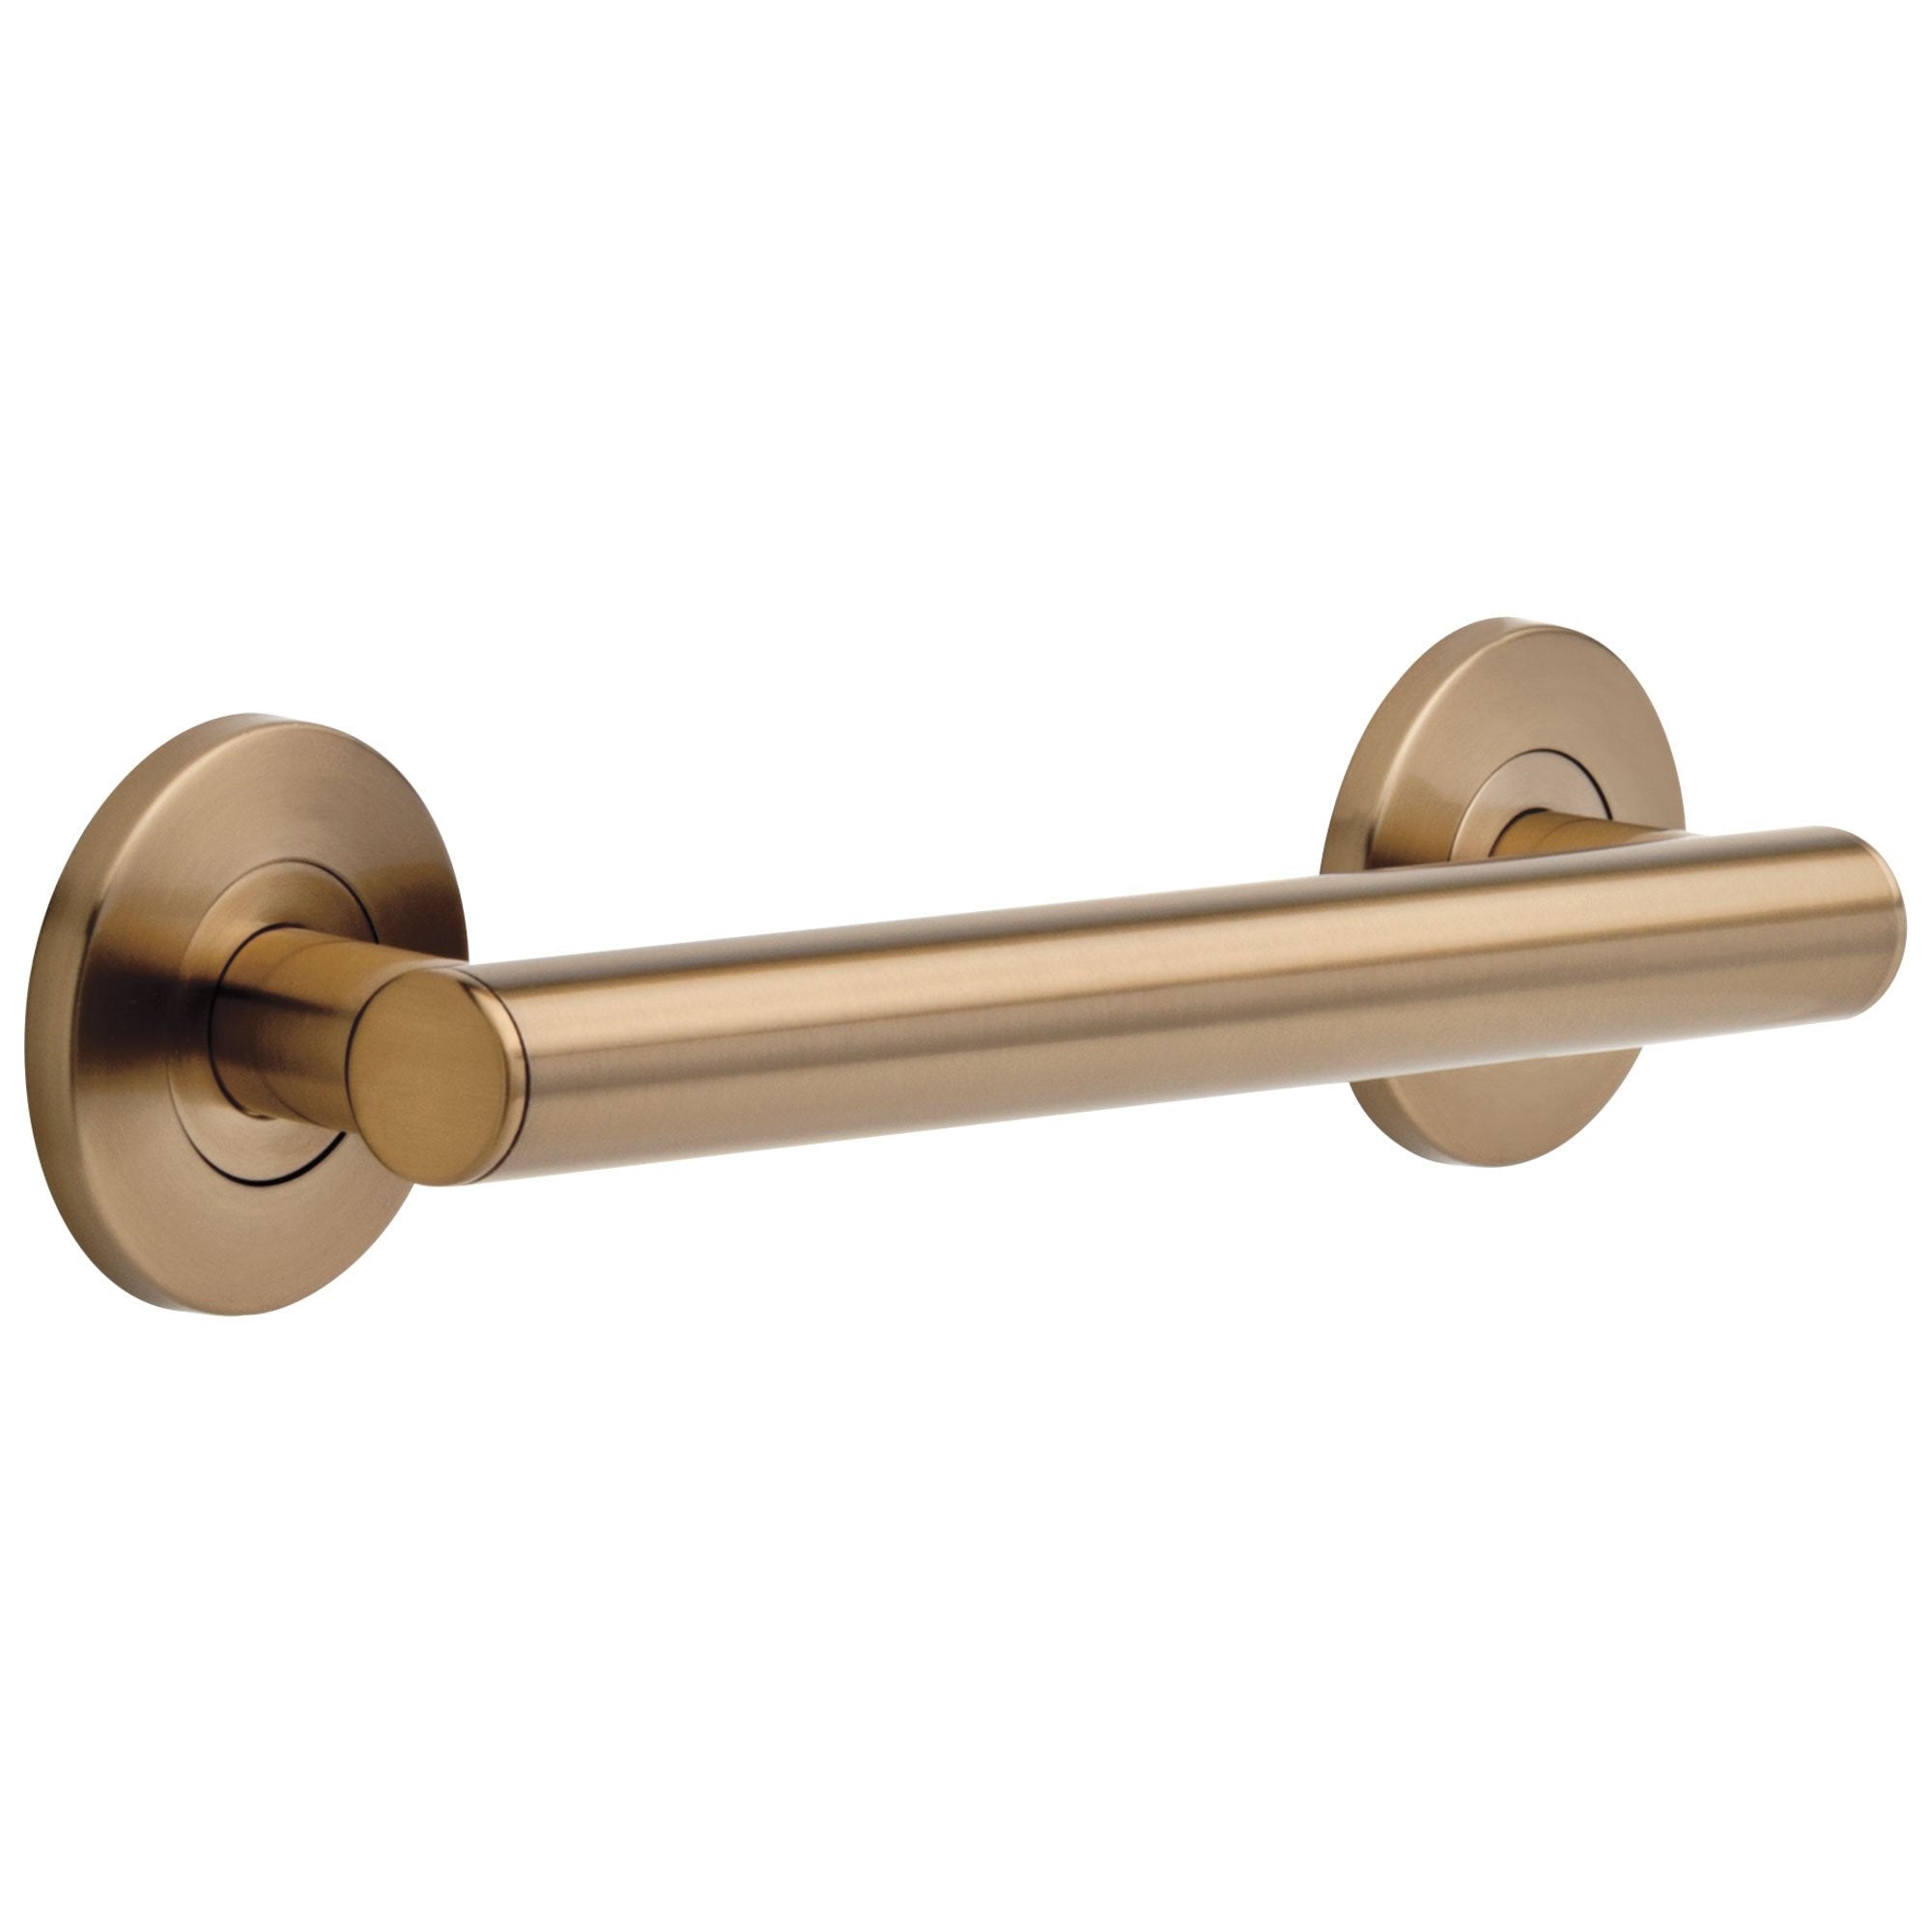 Delta Bath Safety Collection Champagne Bronze Finish Contemporary Wall Mounted Decorative Bathroom ADA Approved Short 12" Grab Bar D41812CZ